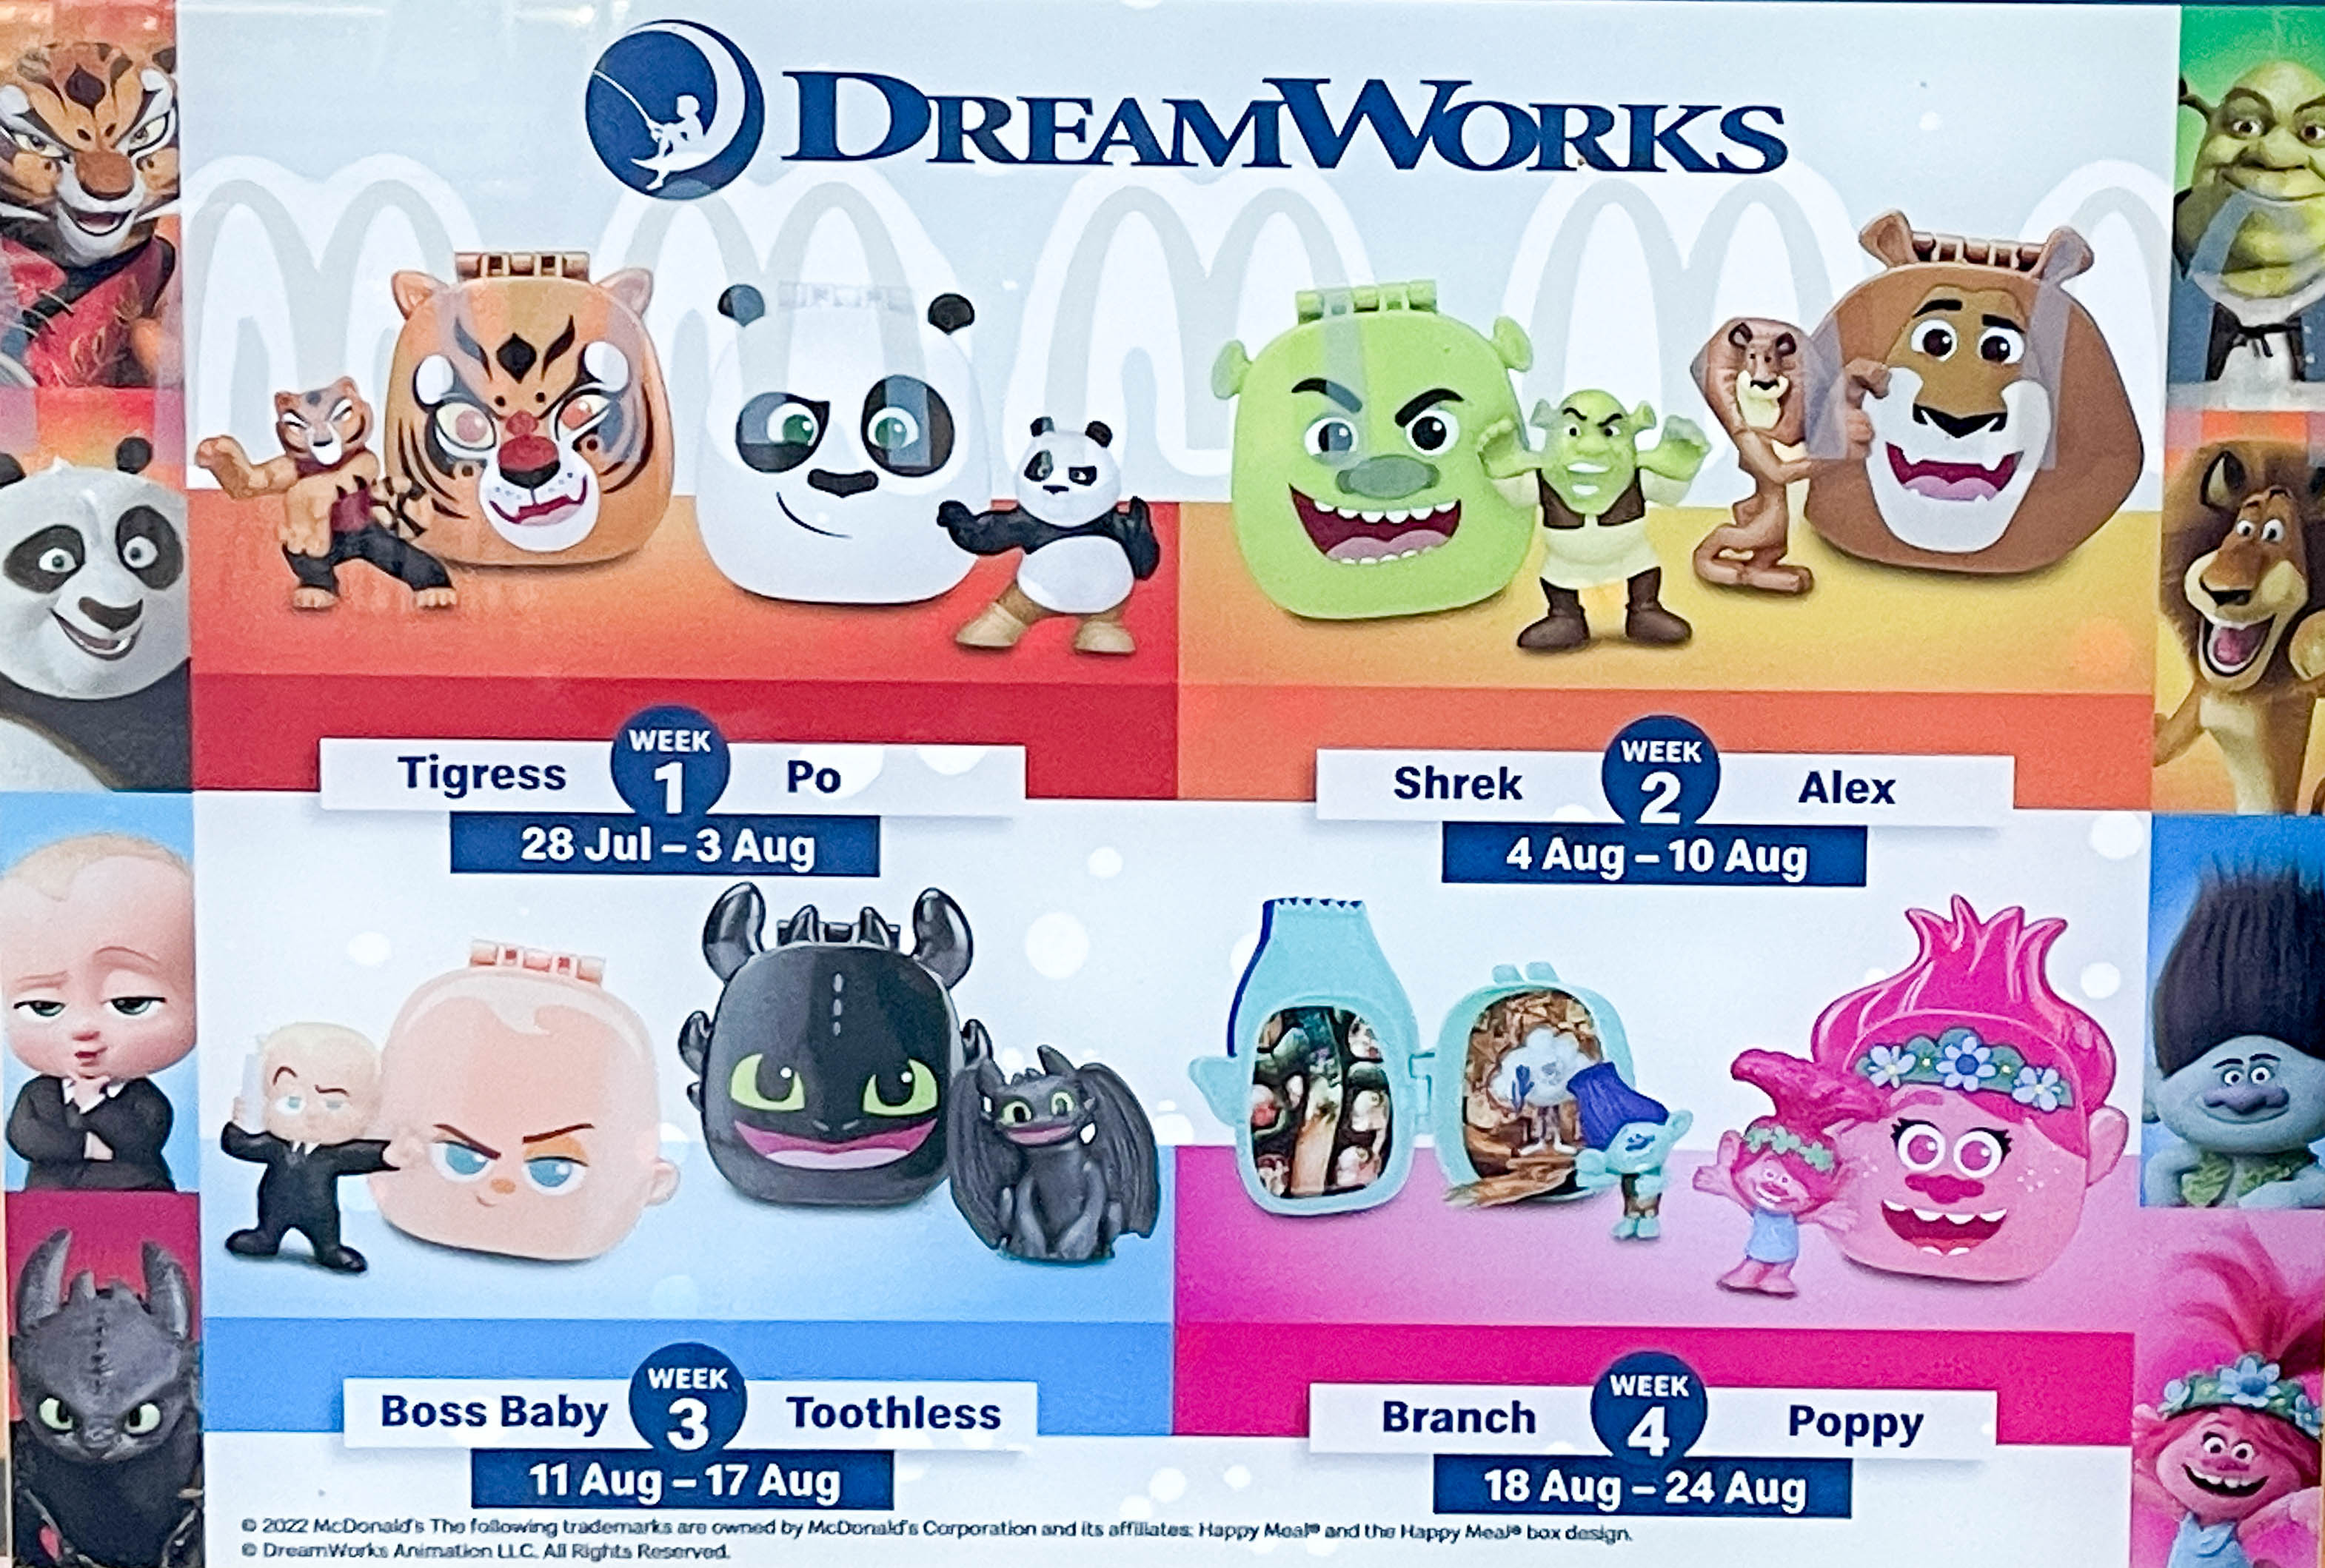 McDonald's Happy Meal Toy August 2022 Dreamworks